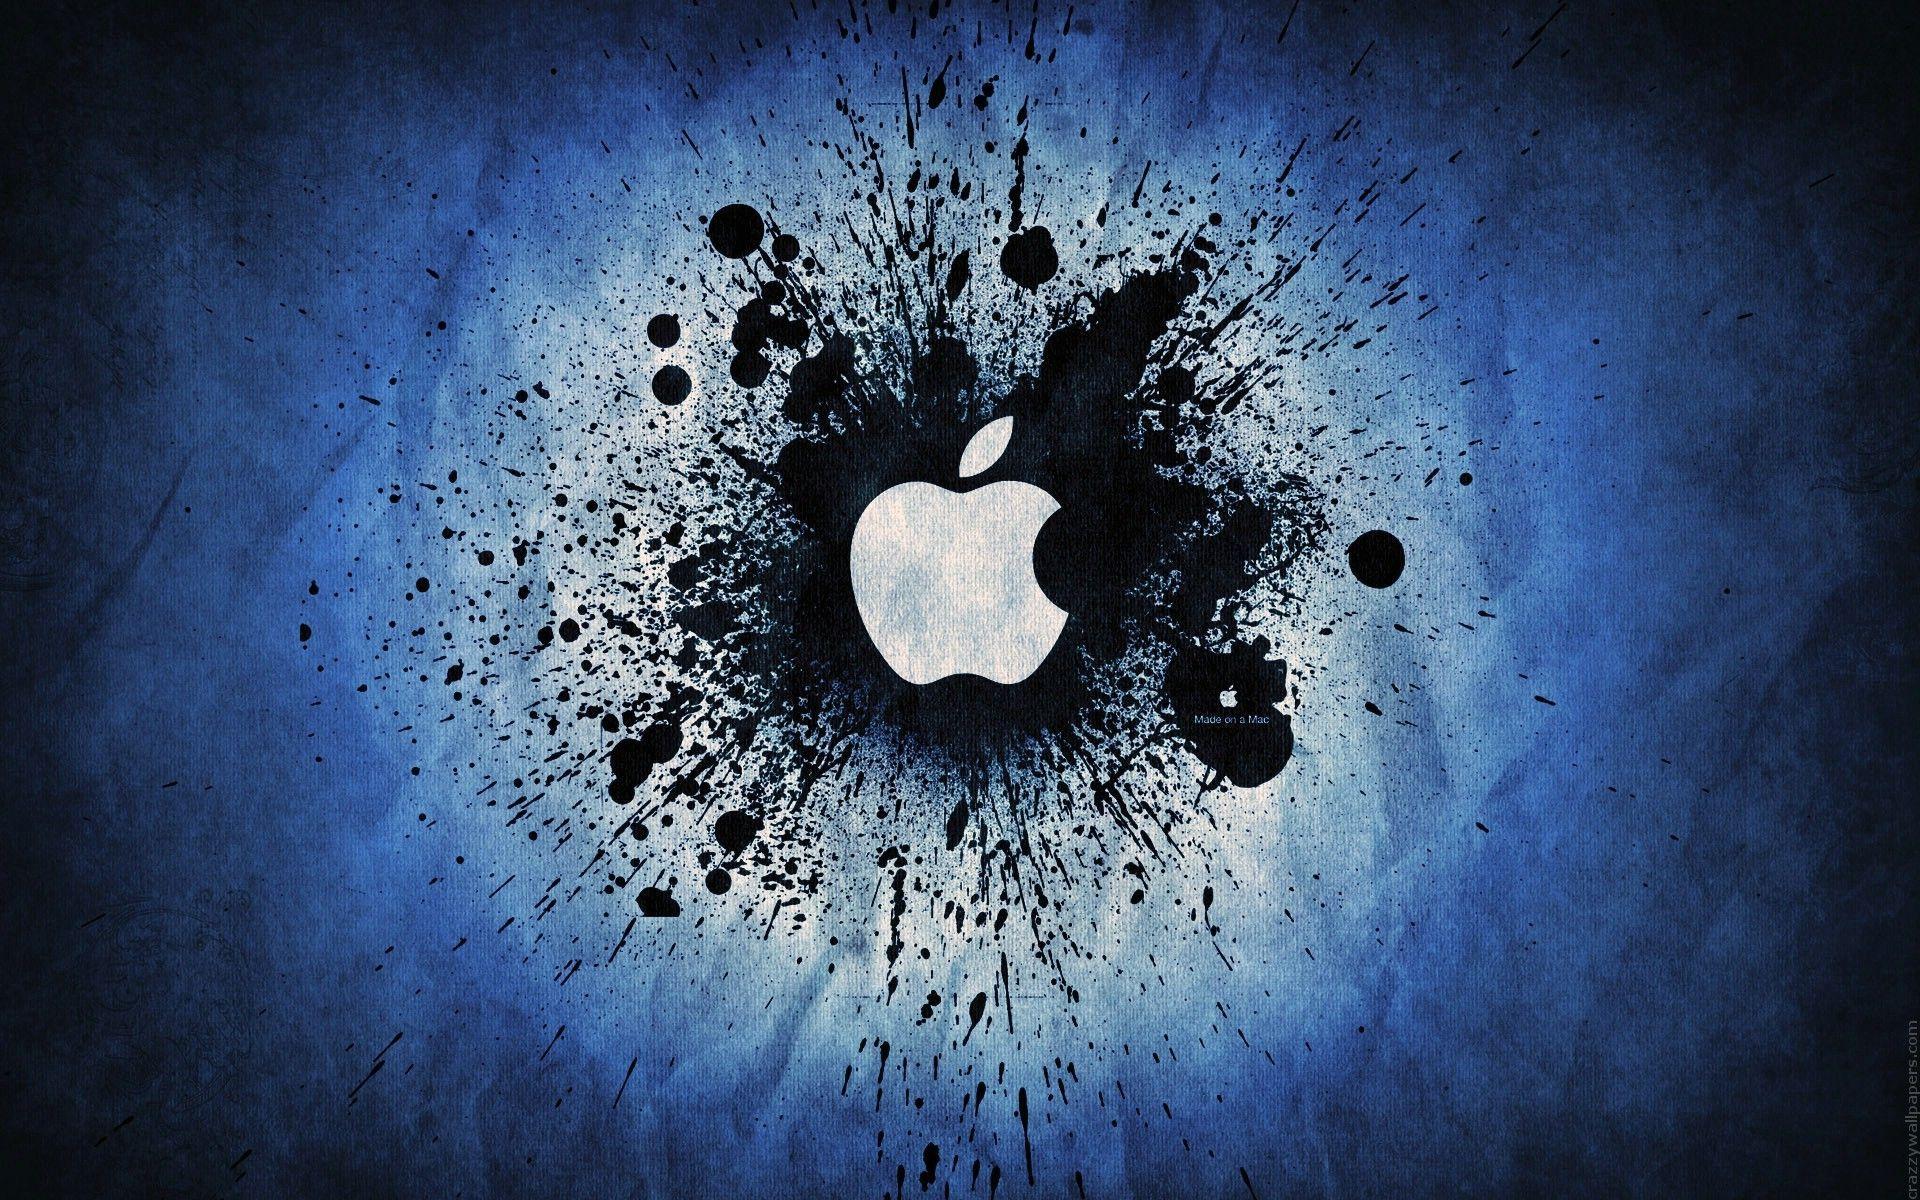 Logos For > Cool Apple Logo Wallpapers Hd